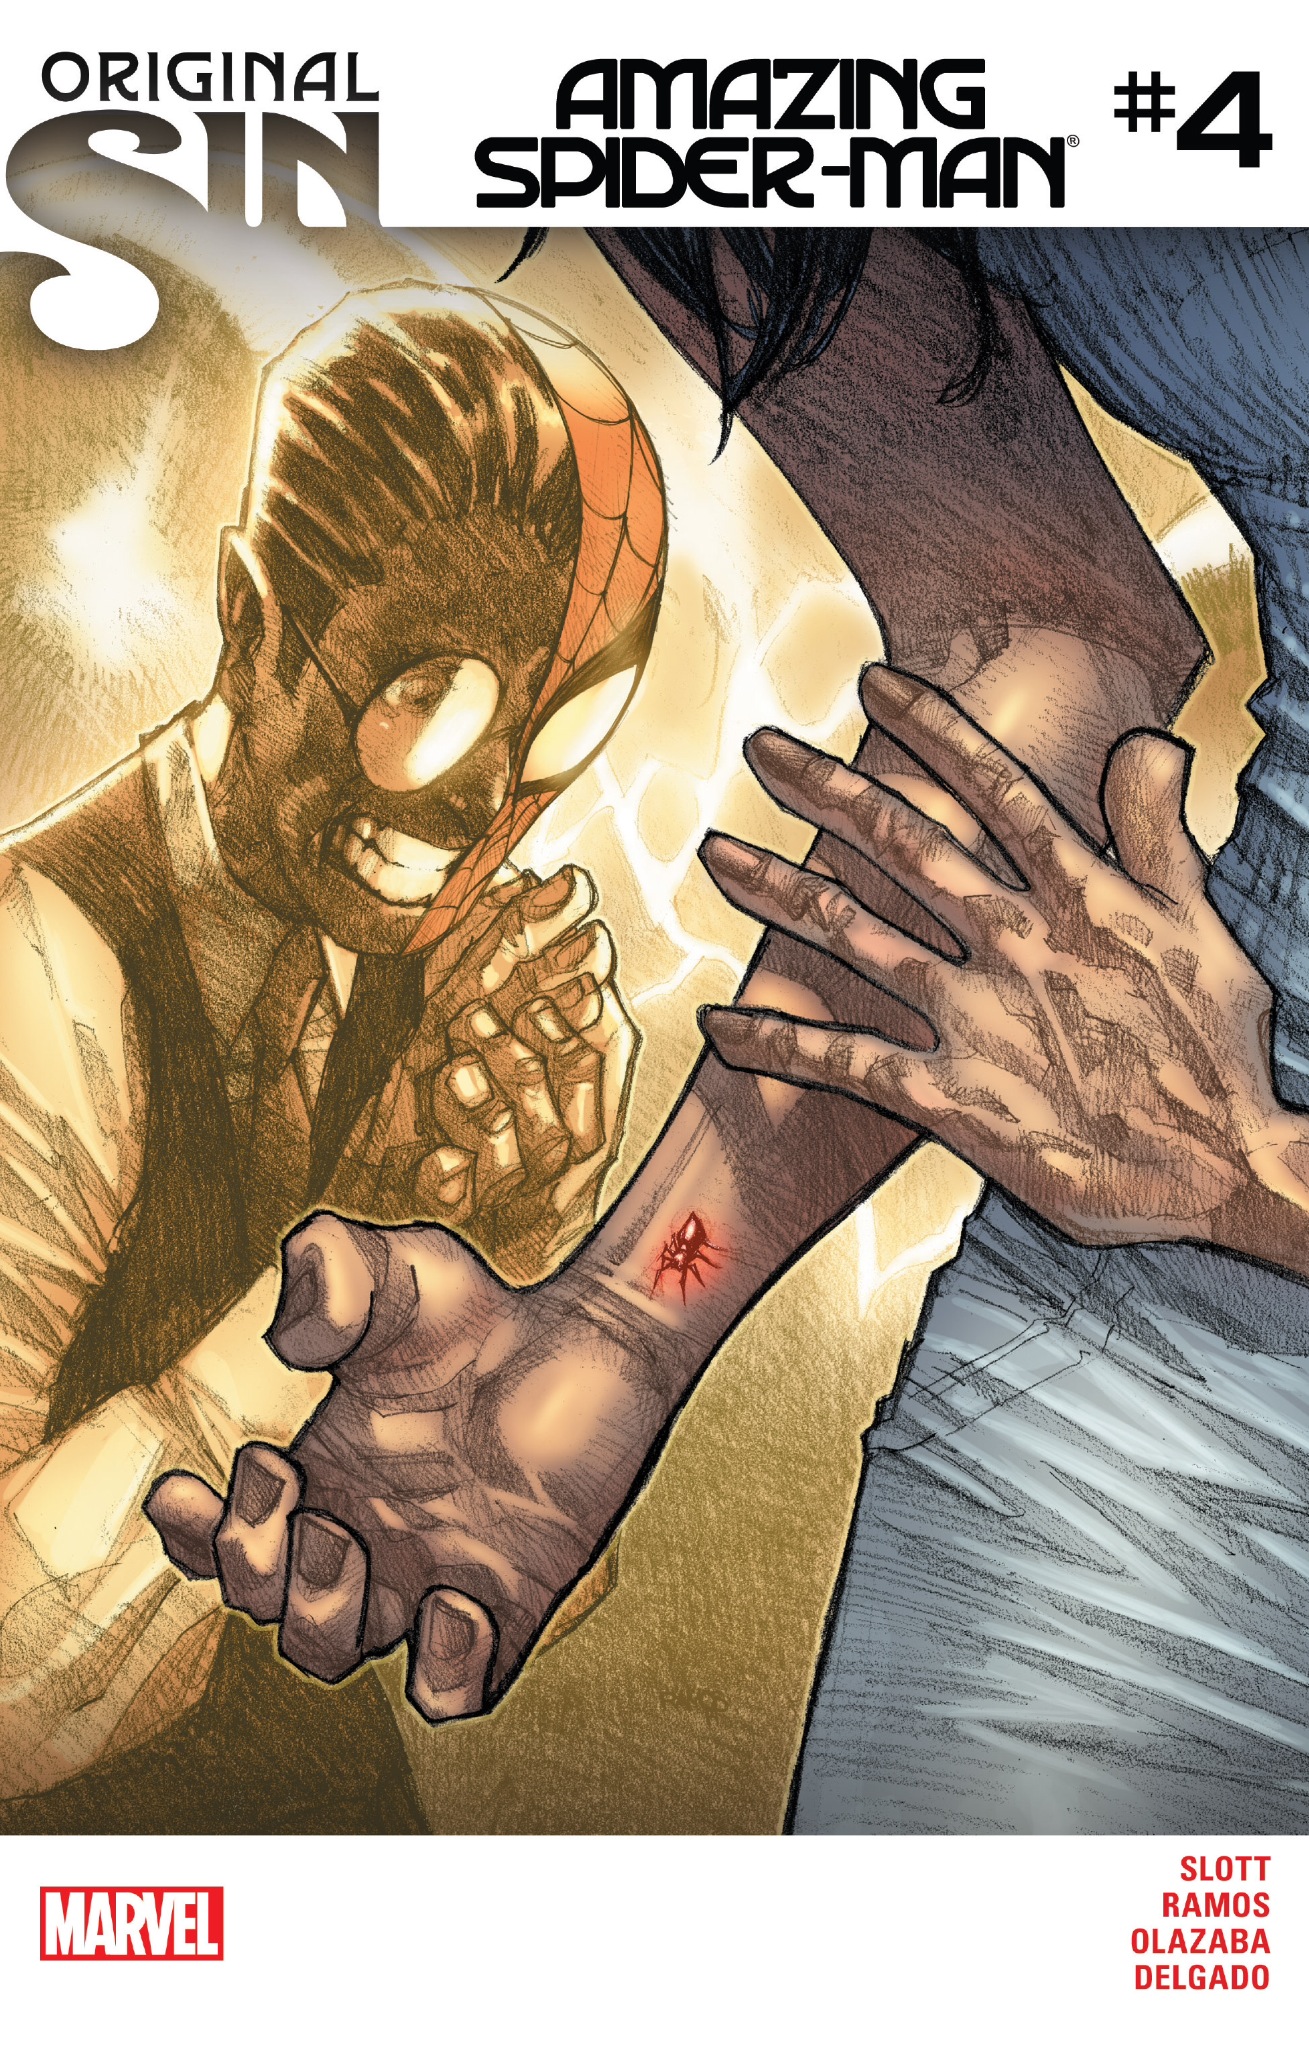 Amazing Spider-Man #4 and an Original Sin Revealed